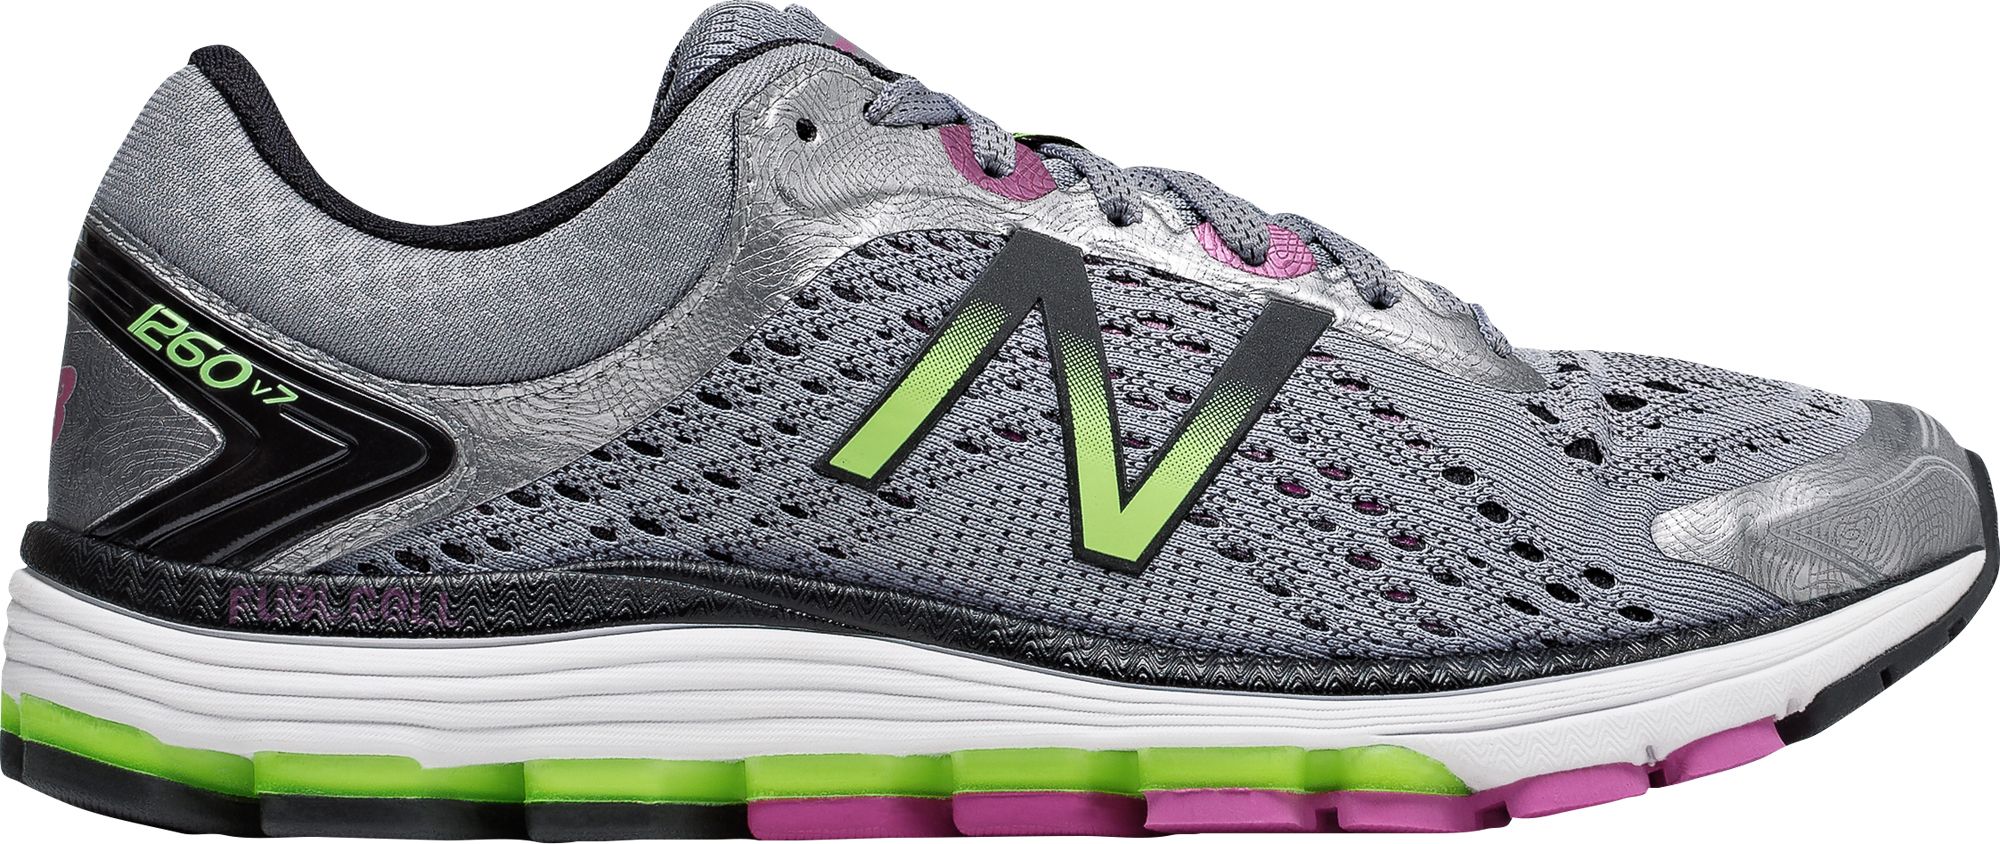 New Balance Running Shoes for Women | Best Price Guarantee at DICK'S